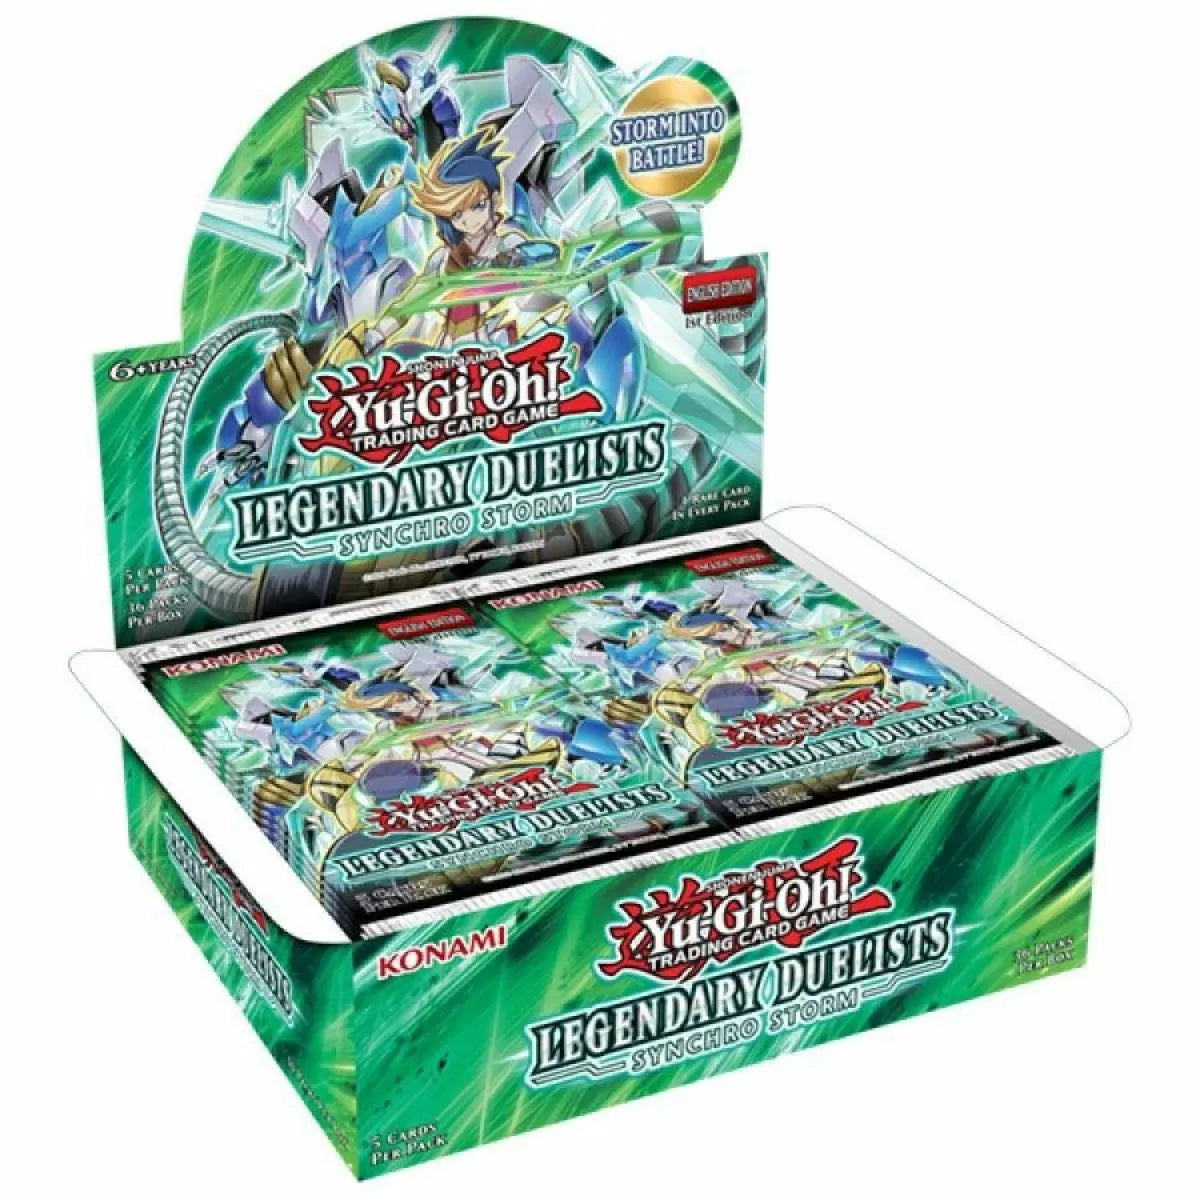 Yugioh - Legendary Duelists Synchro Storm Booster Box